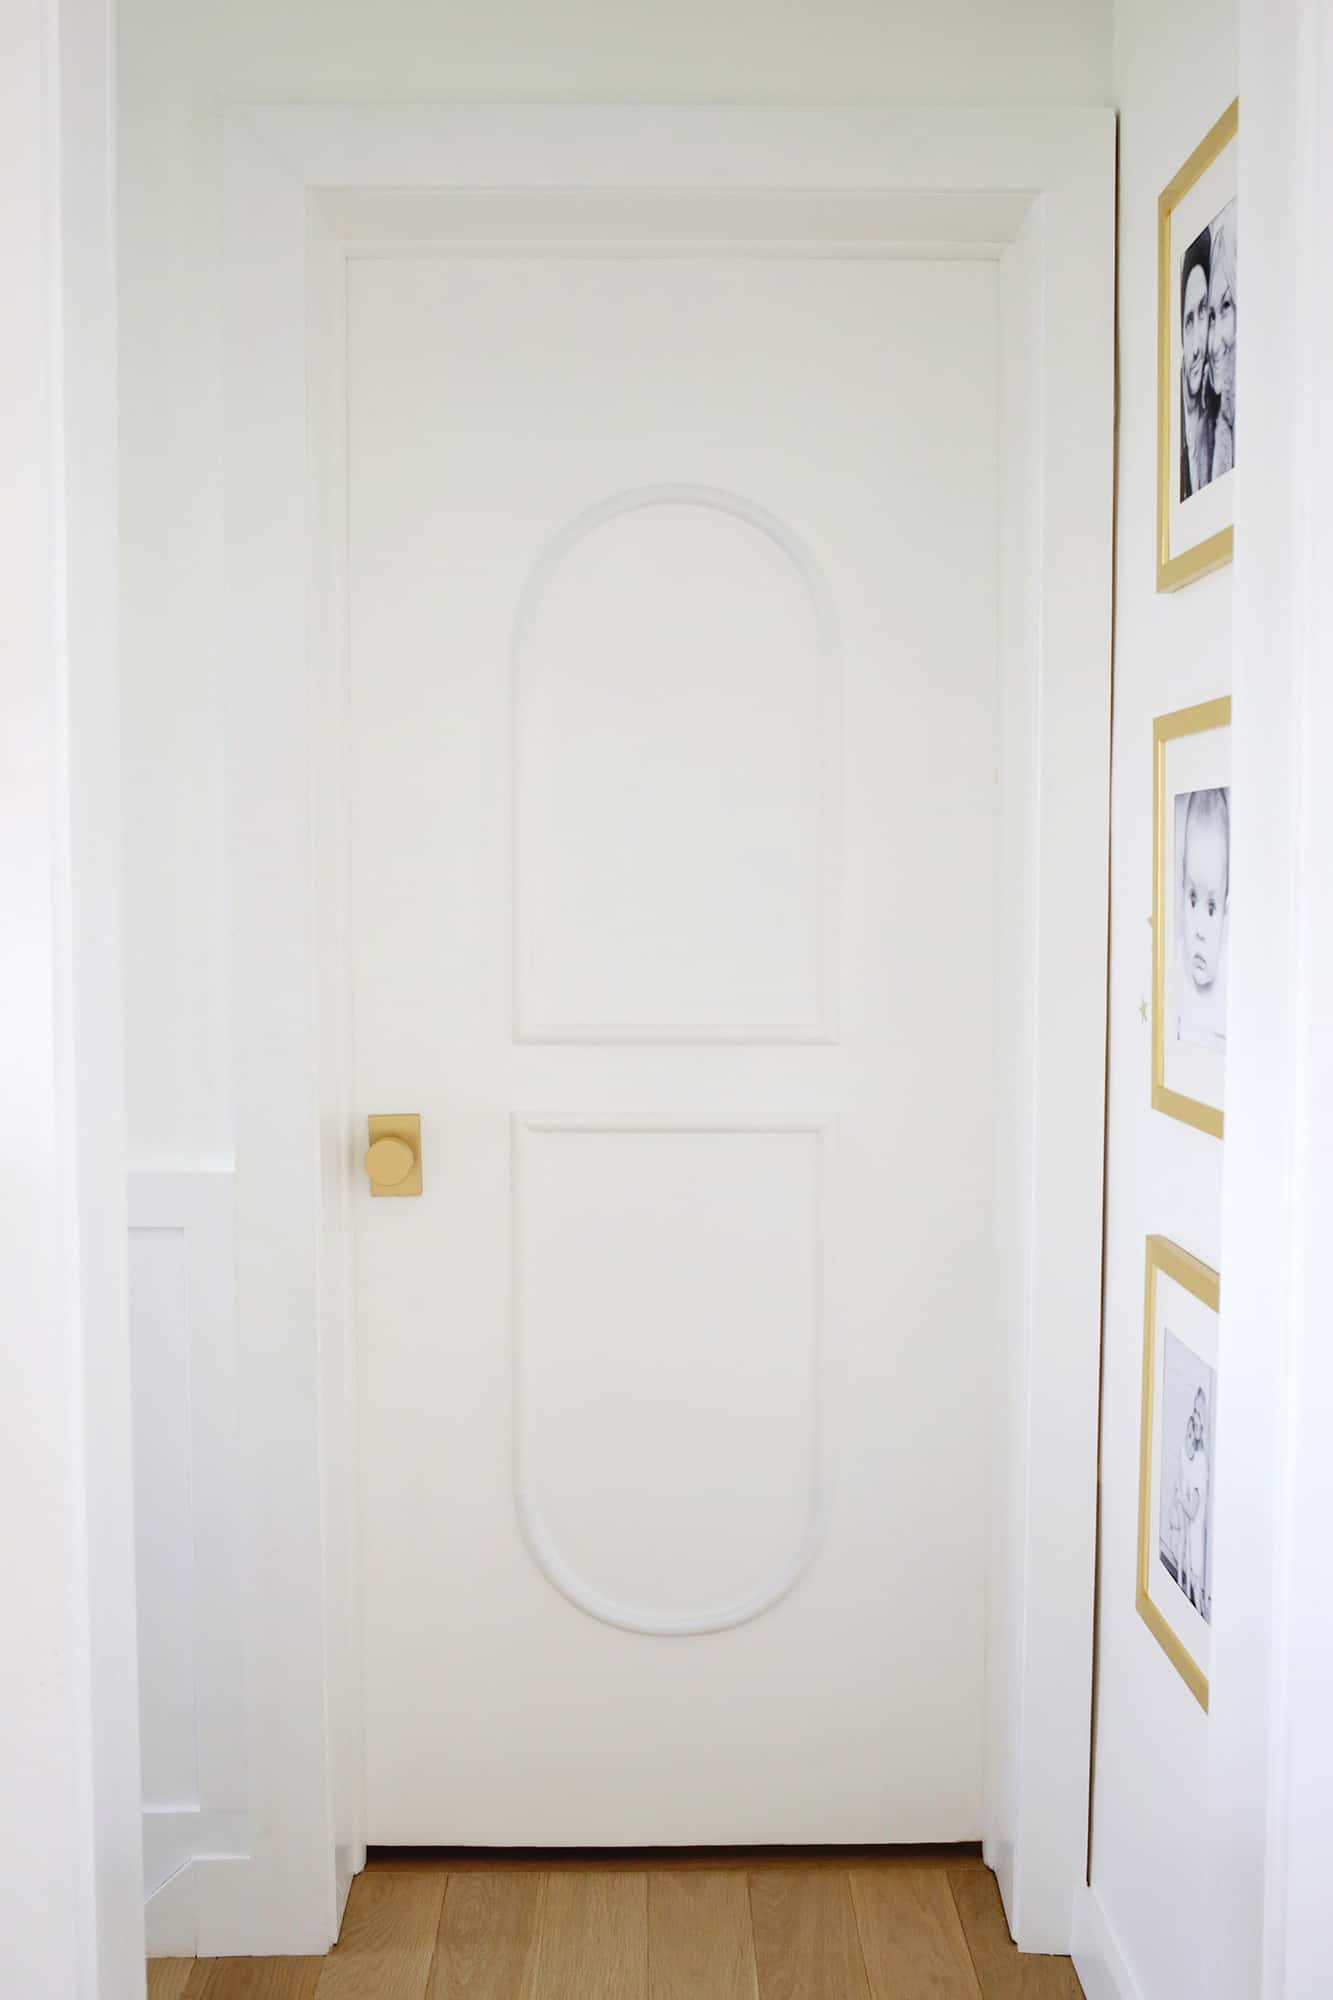 Door with brass fittings and a curved decorative strip